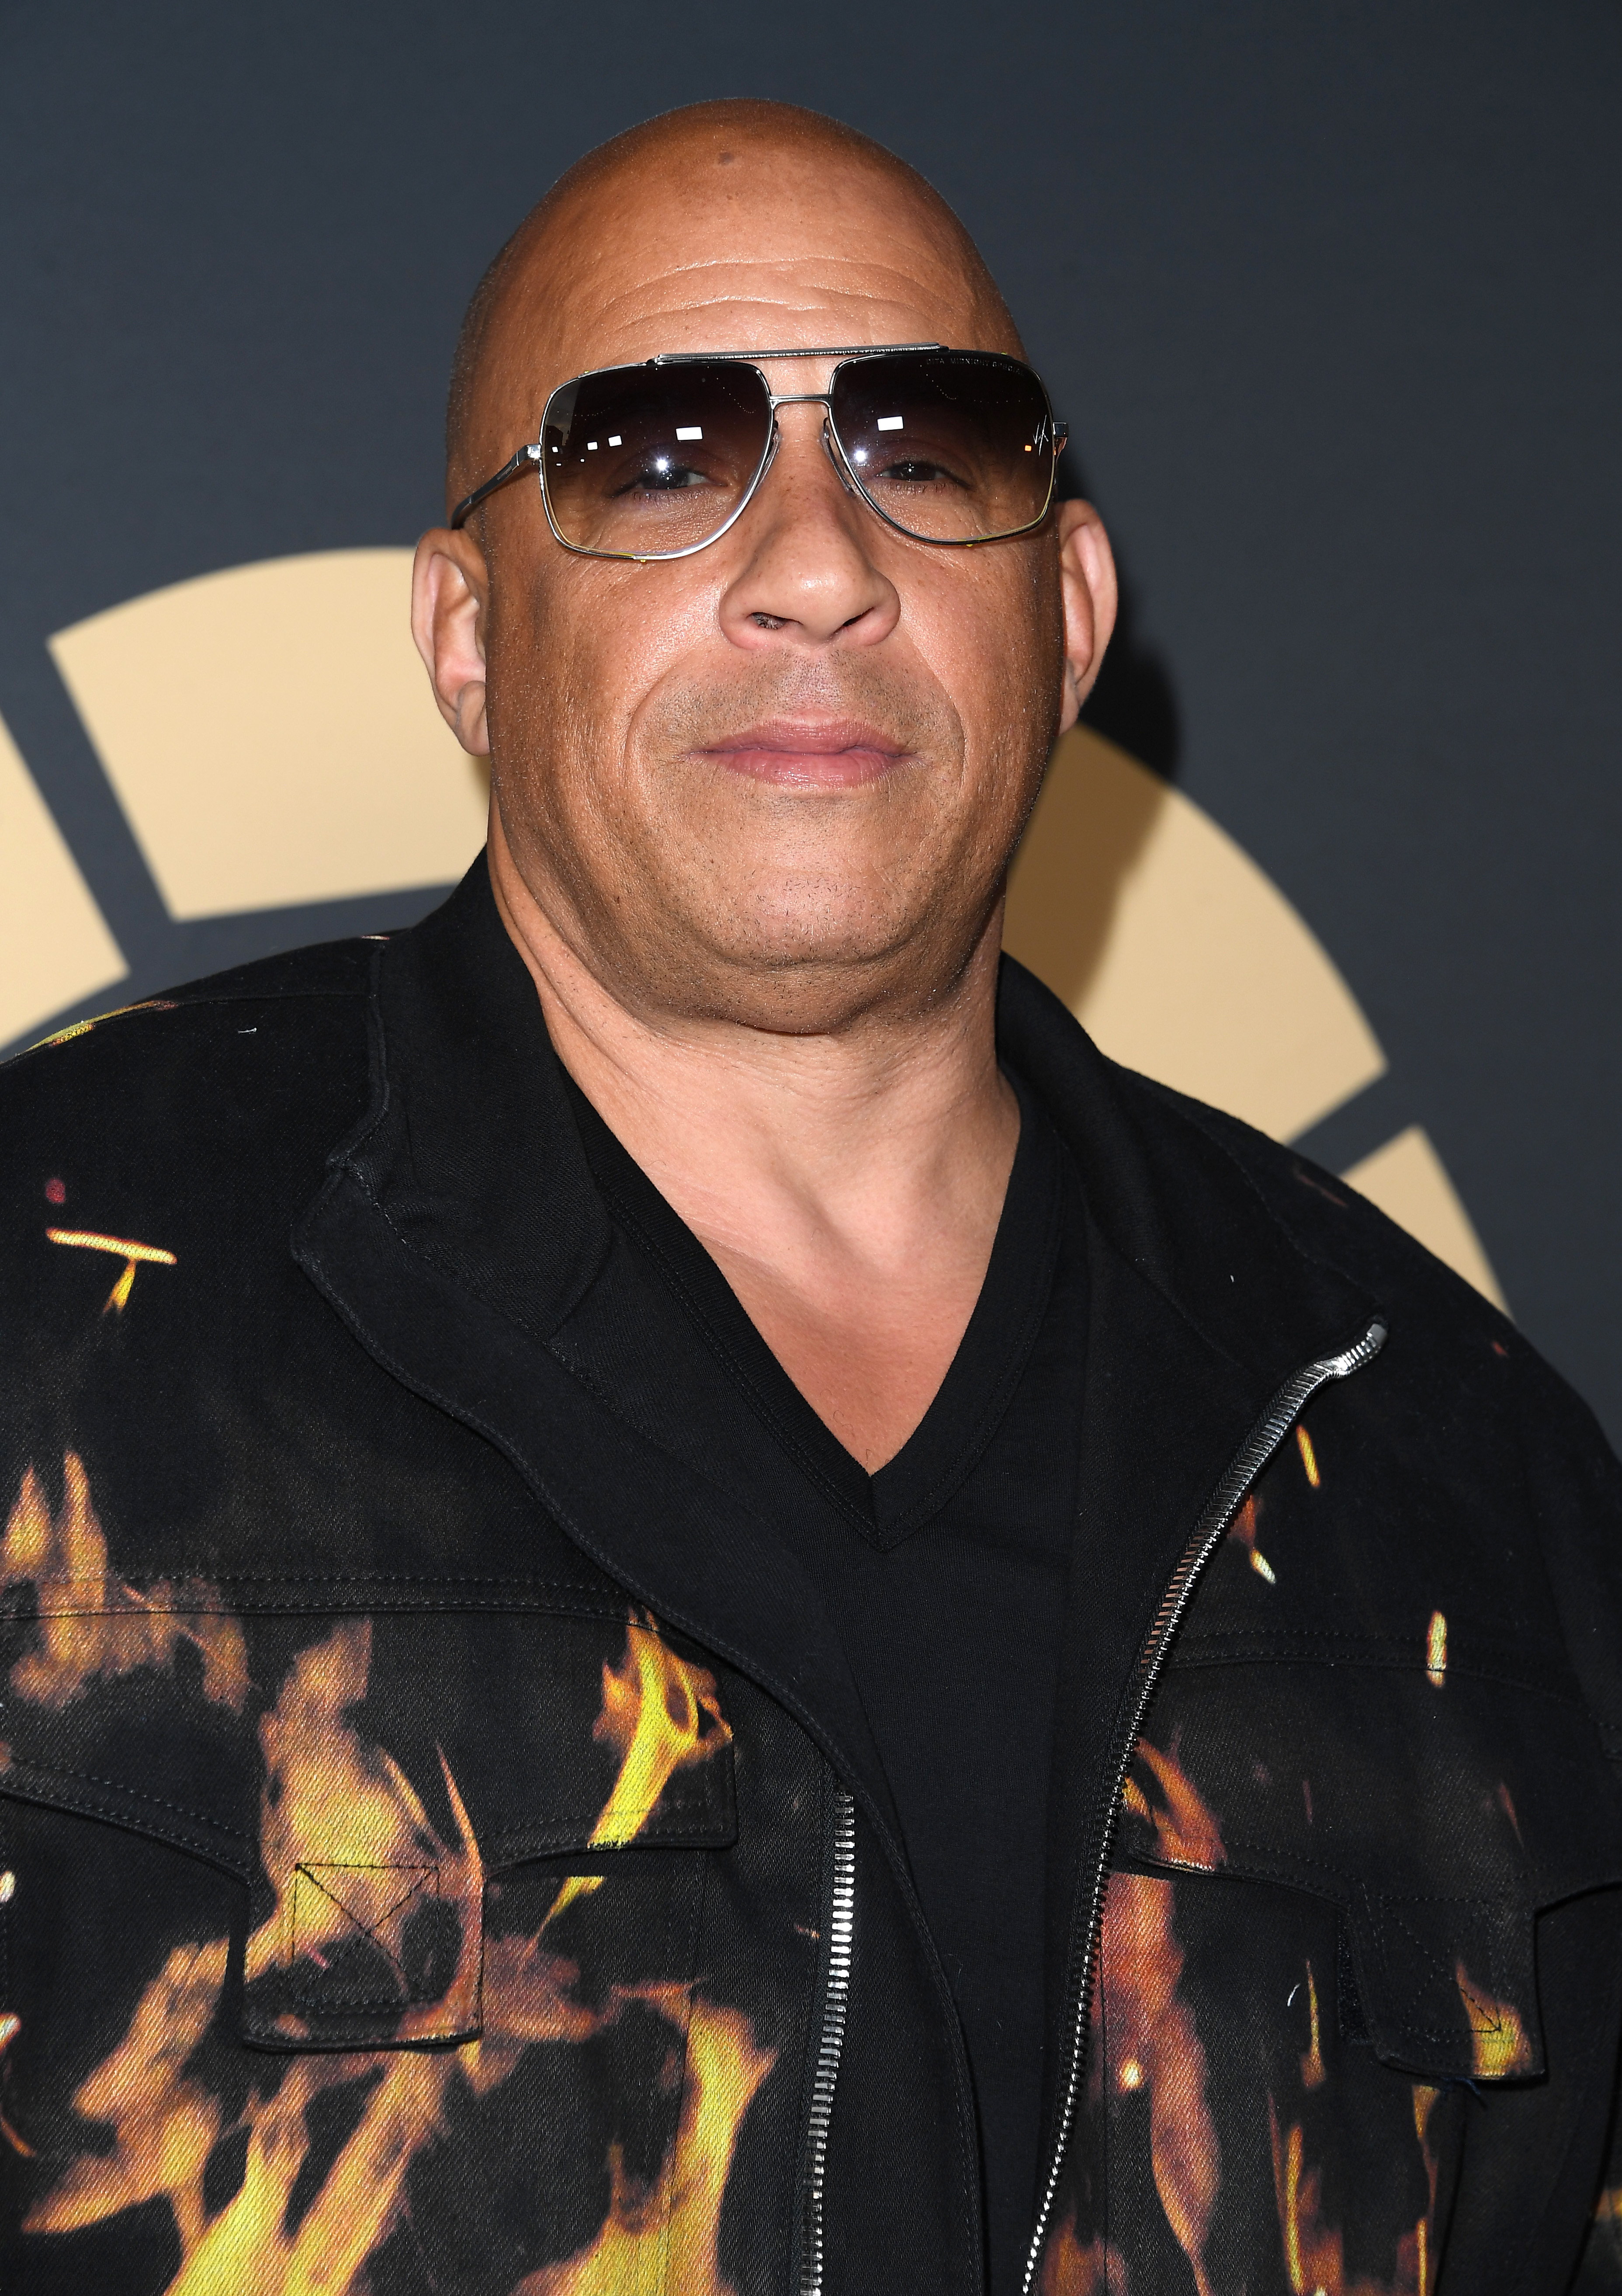 Vin Diesel wearing a black jacket with orange flame patterns and sunglasses, and standing in front of a promotional backdrop